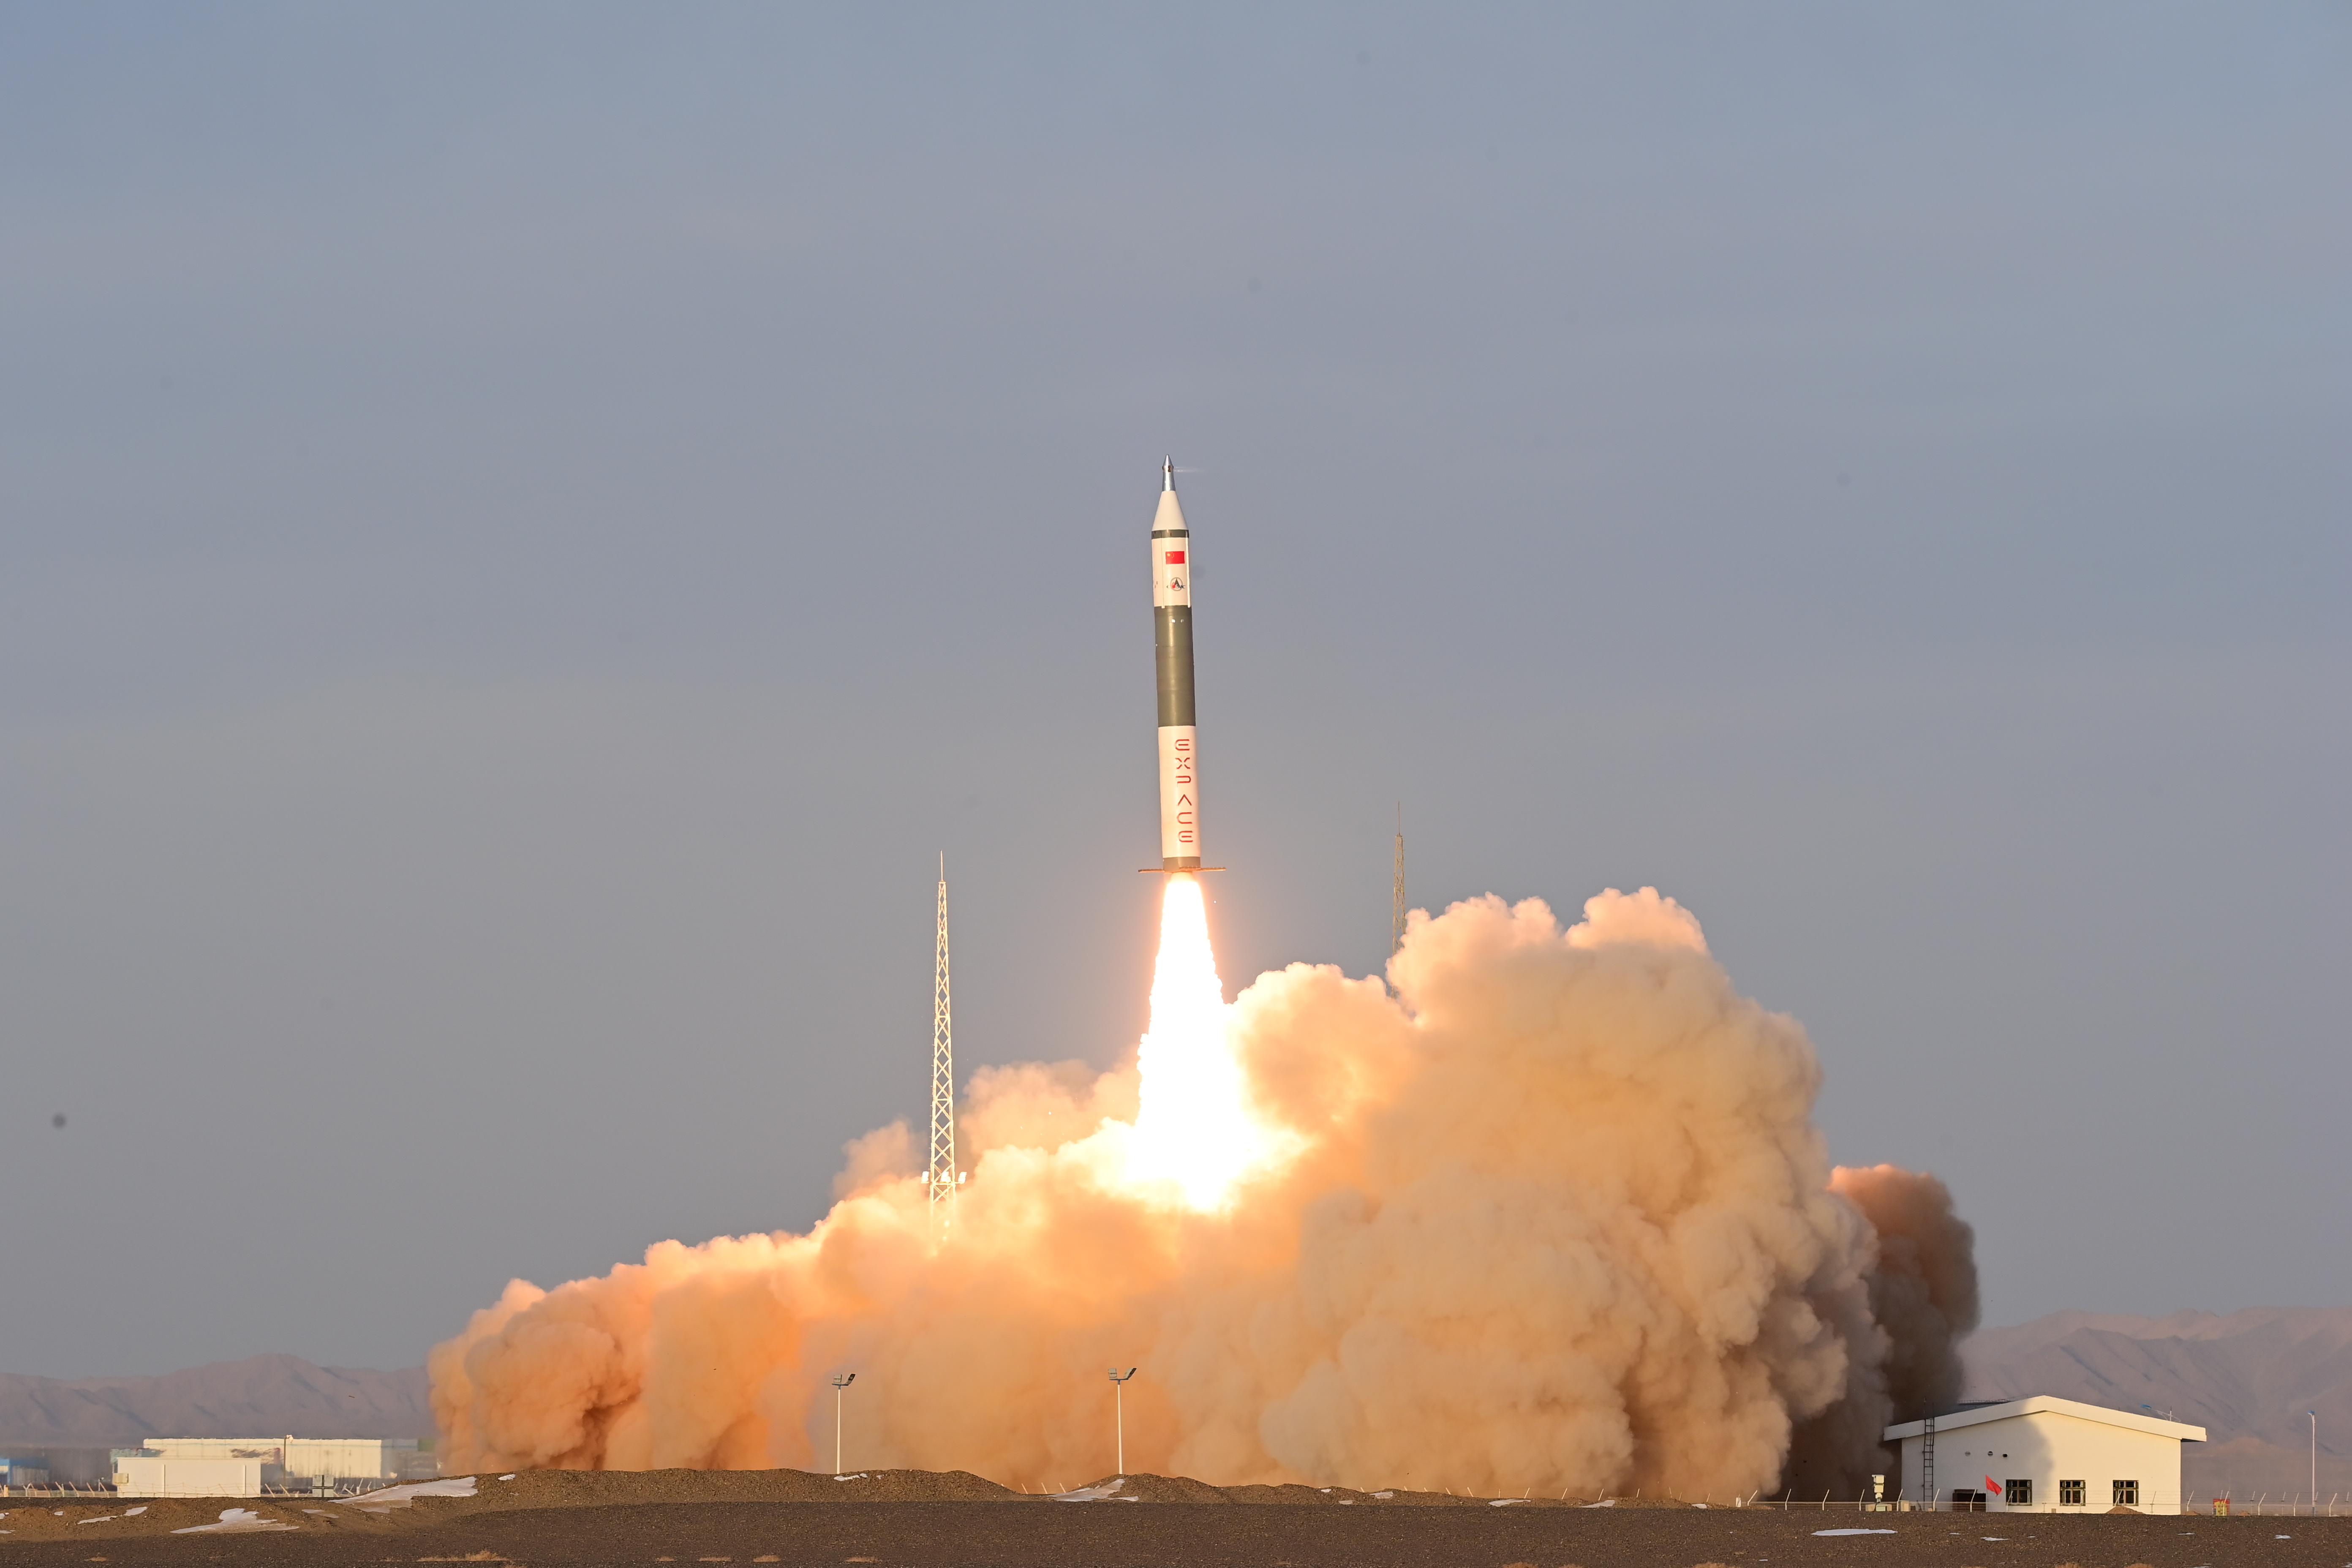 China launches its newest solid-fuel carrier rocket Kuaizhou 11 Y-2 at 9:15 a.m. (BJT) from Jiuquan Satellite Launch Center in northwest China, December 7, 2022. /CGTN